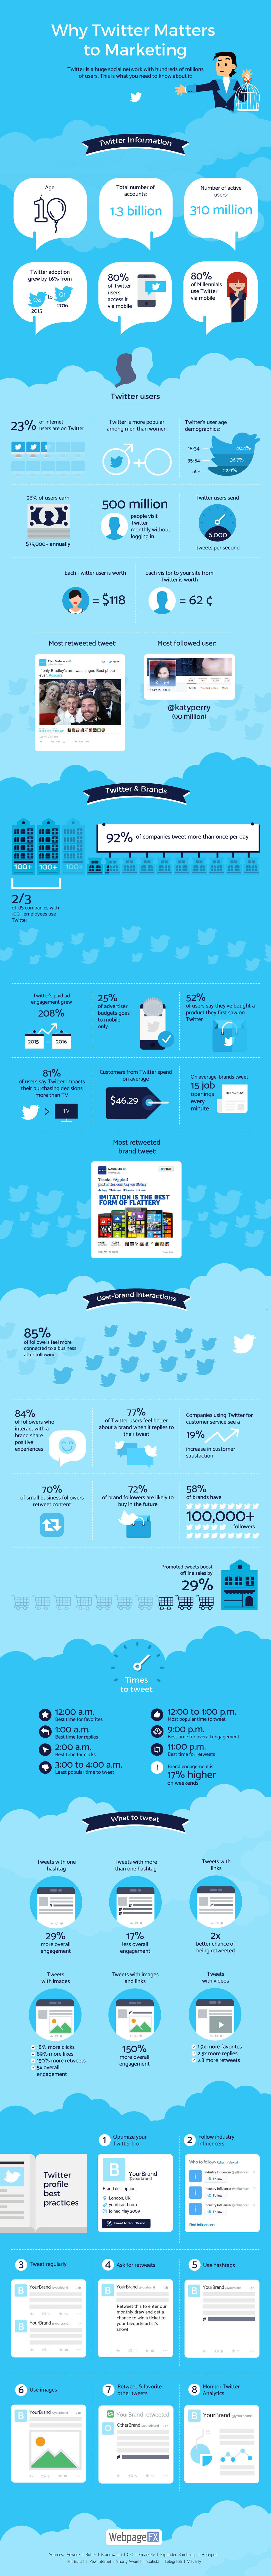 Using Twitter for Marketing Infographic